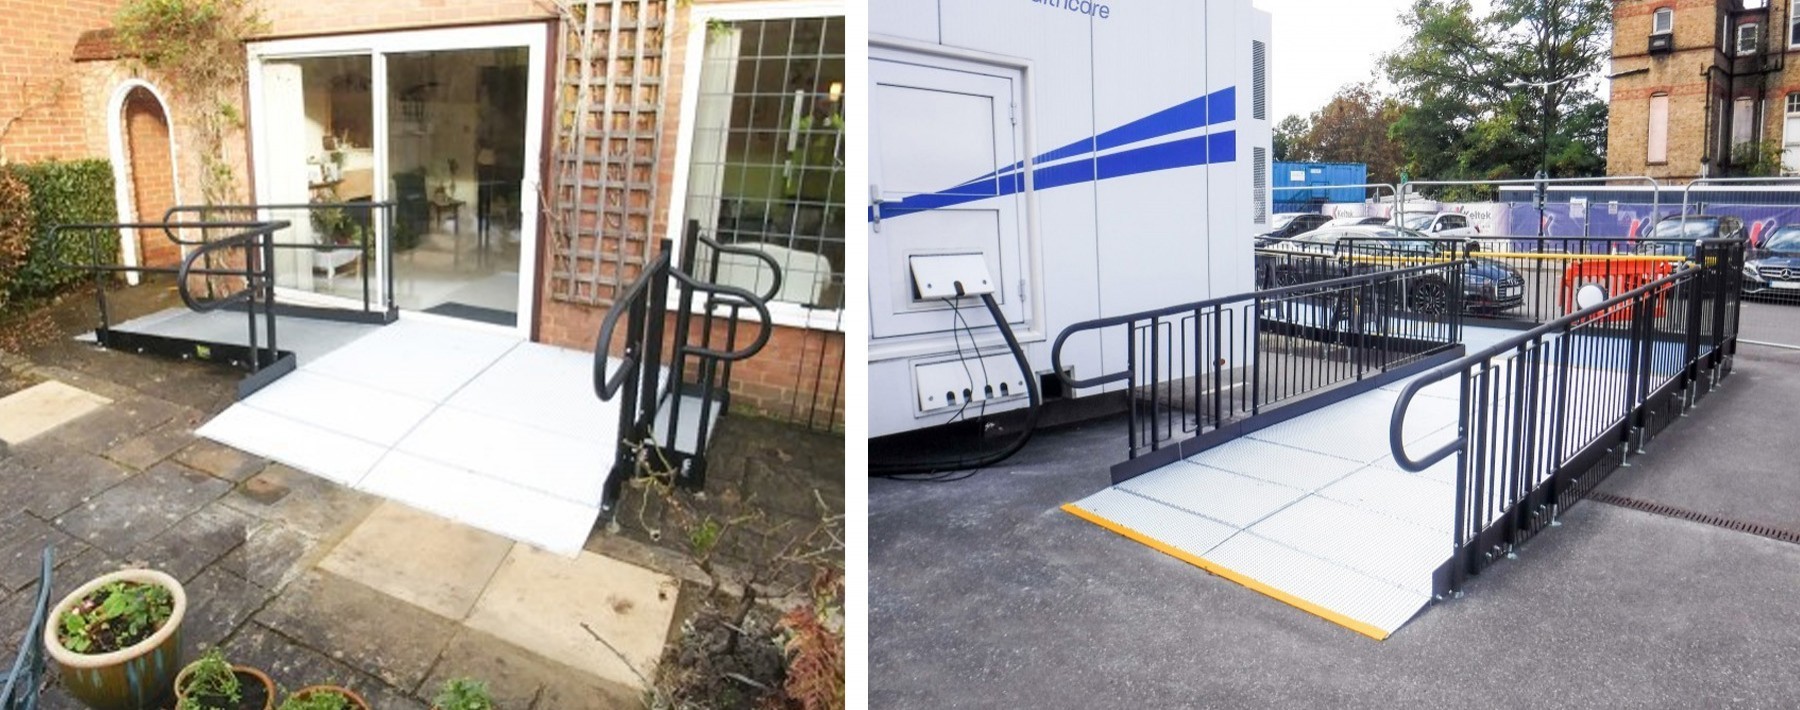 How wide should a wheelchair ramp be? photo